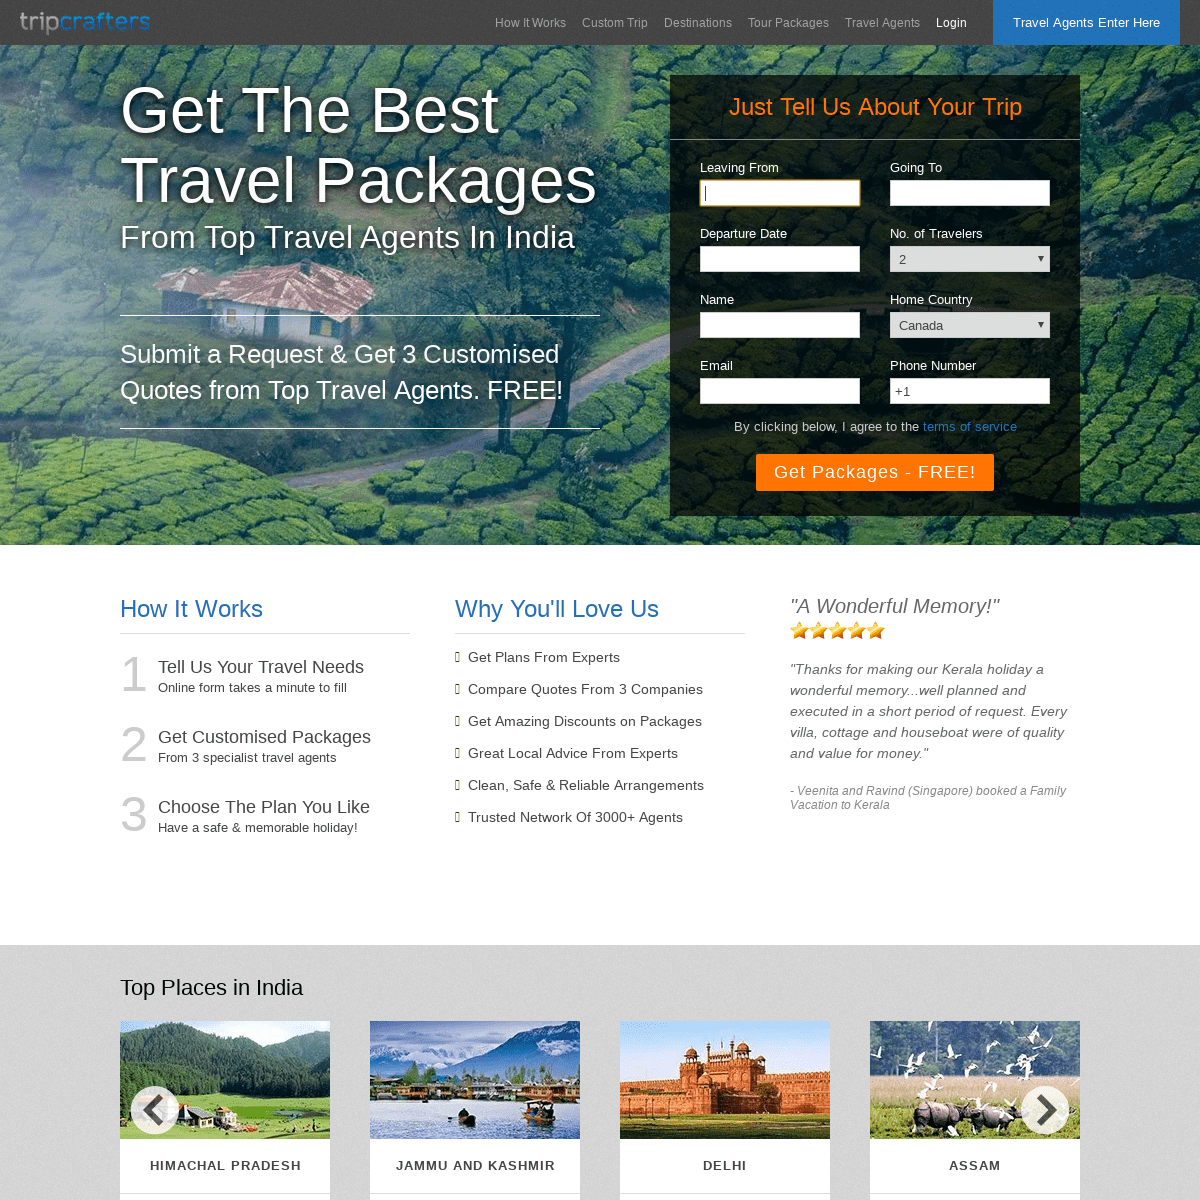 TripCrafters - Online Travel Marketplace